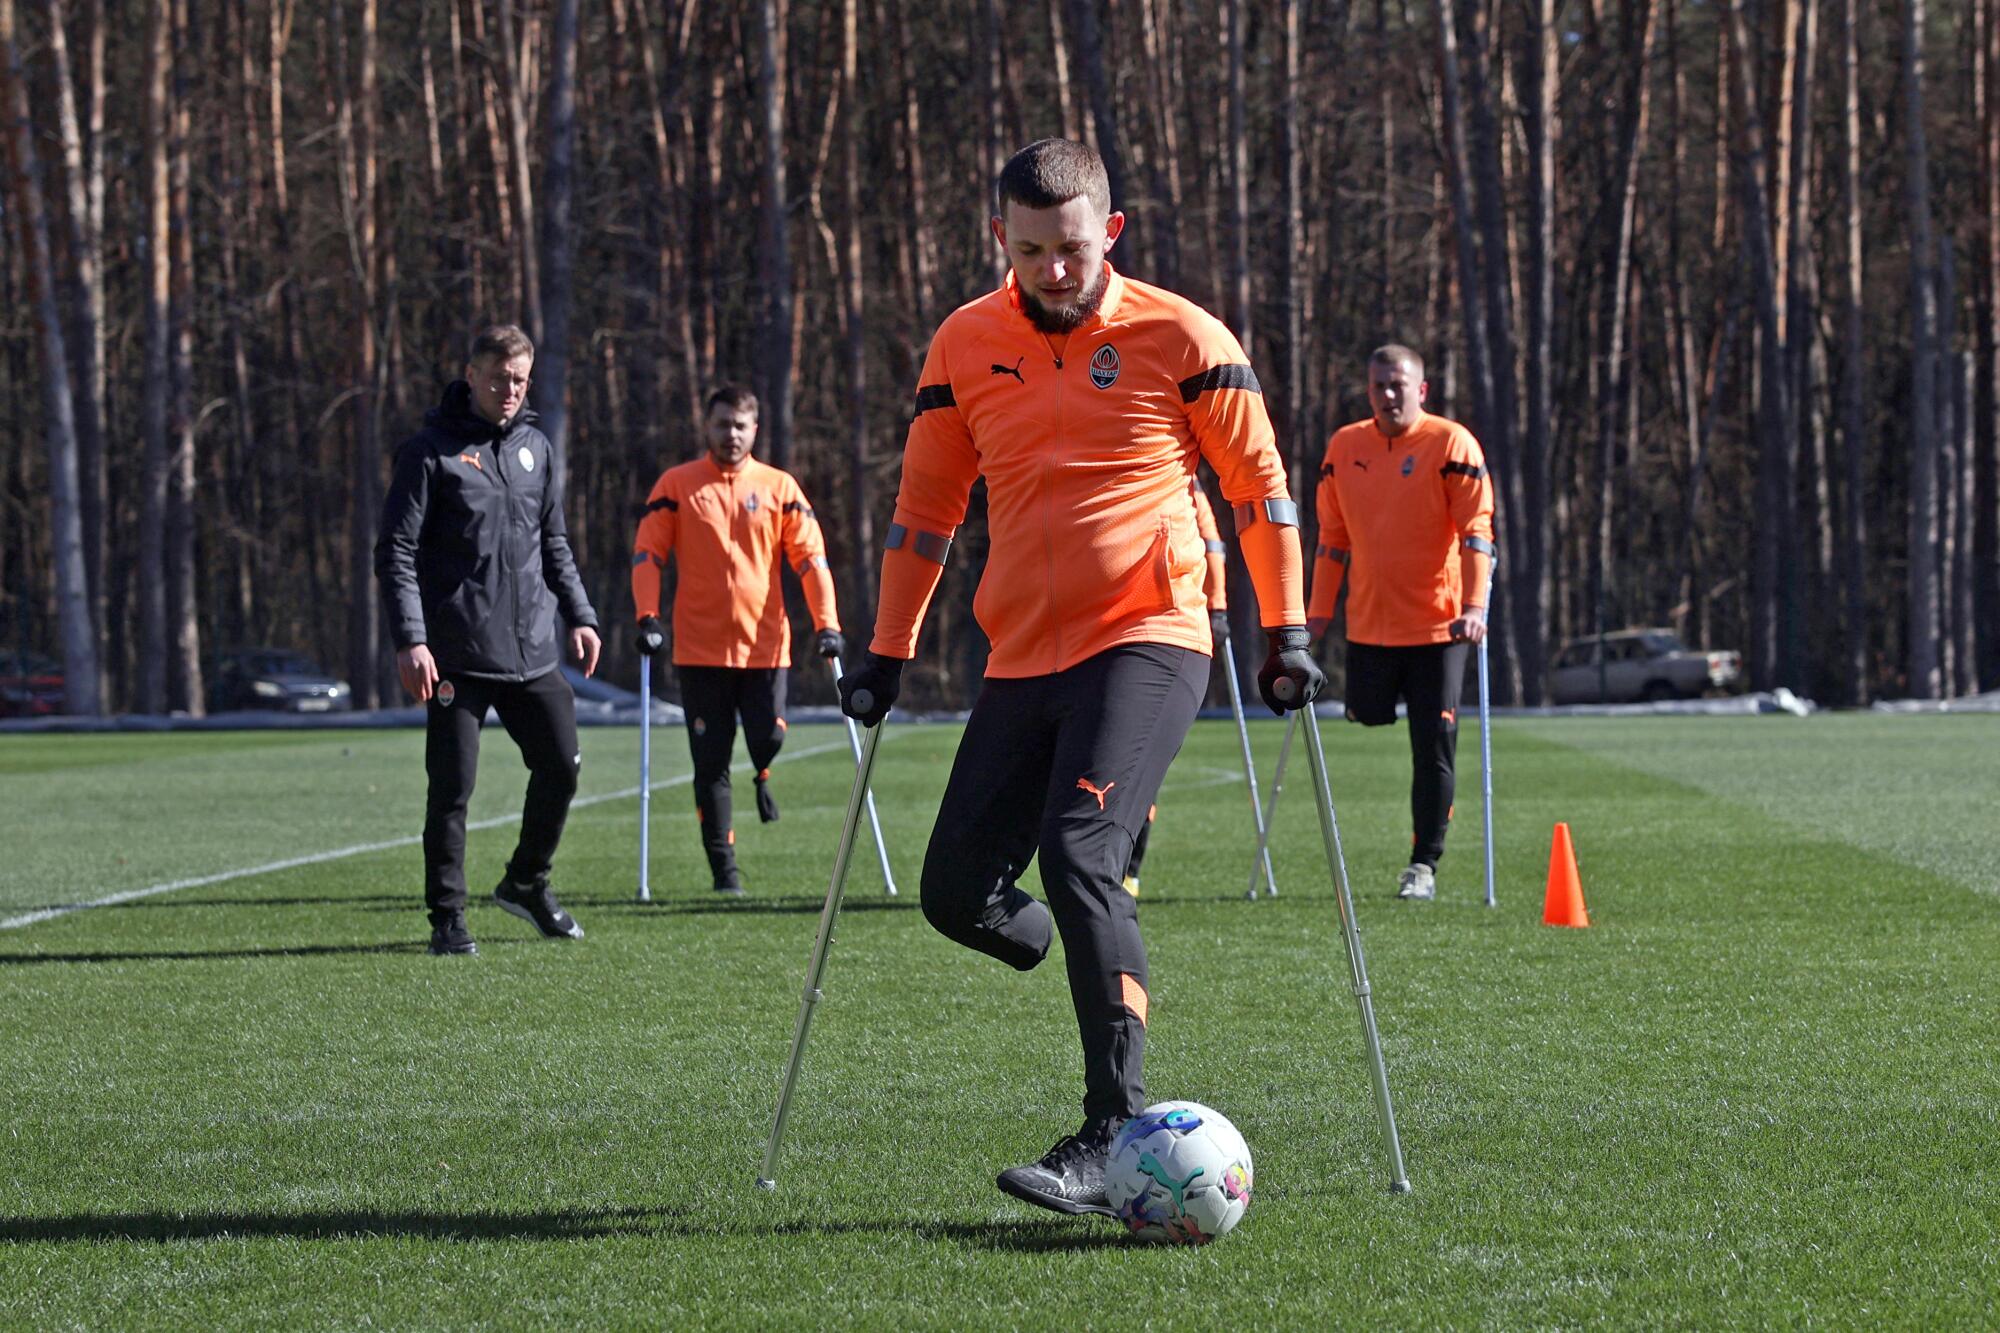 Members of the FC Shakhtar Donetsk soccer team for amputee veterans take part in a training session.